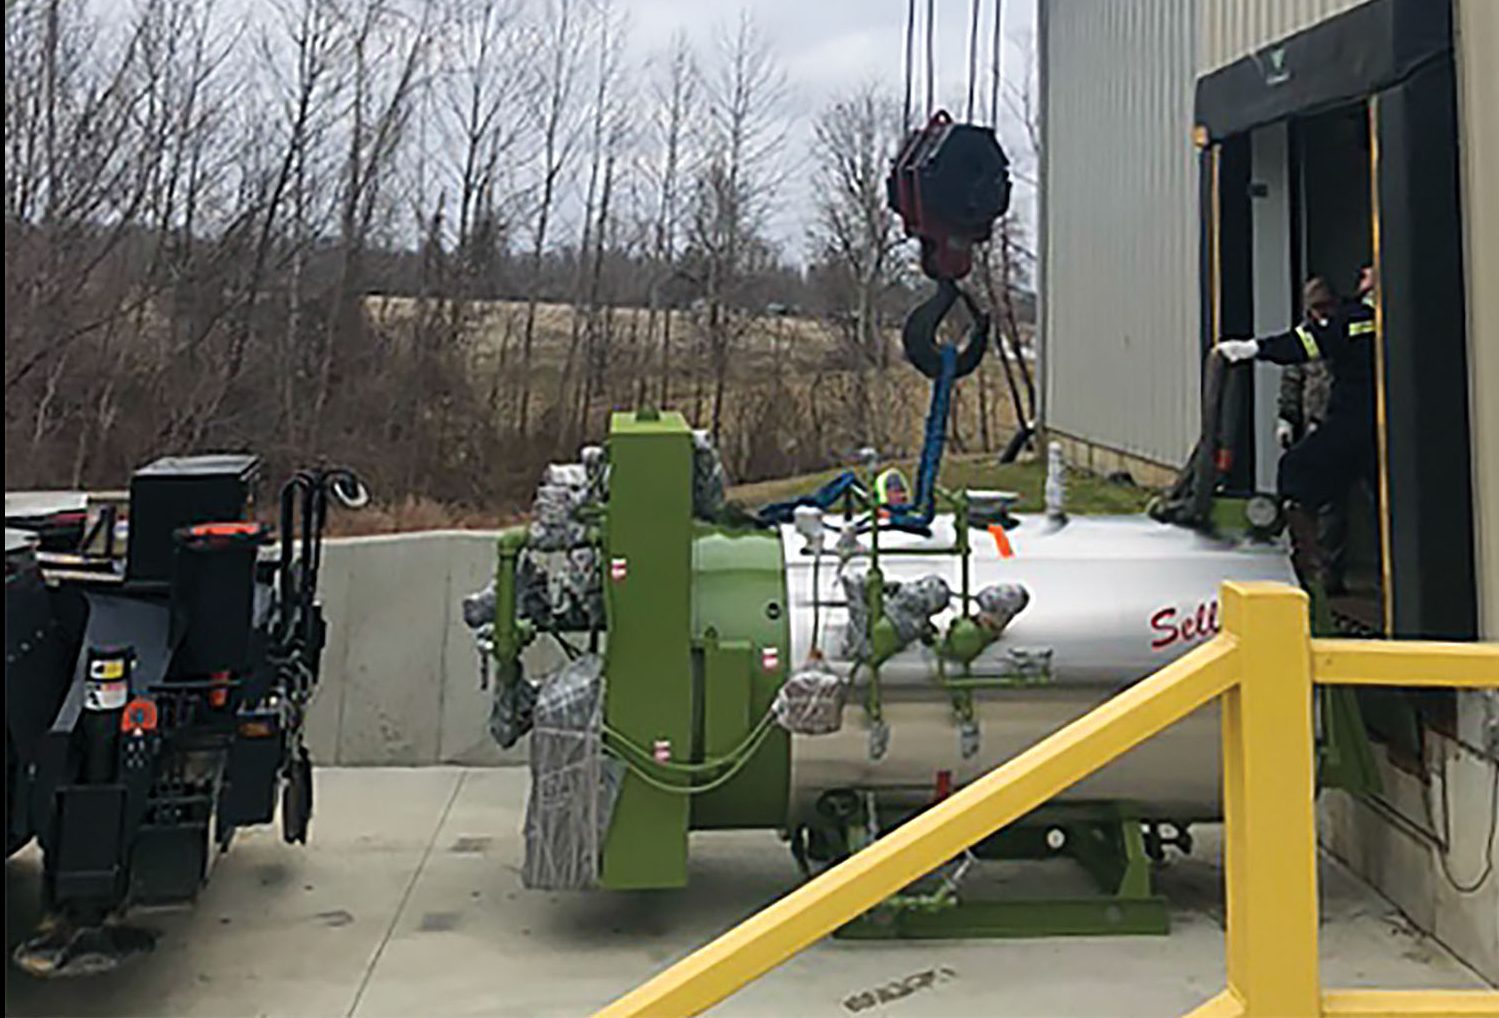 A boiler that will help turn Asian carp into fish meal for Novaland Group LLC arrives at Two Rivers Fisheries in Wickliffe, Ky. (Photo courtesy Ballard County judge-executive’s office)